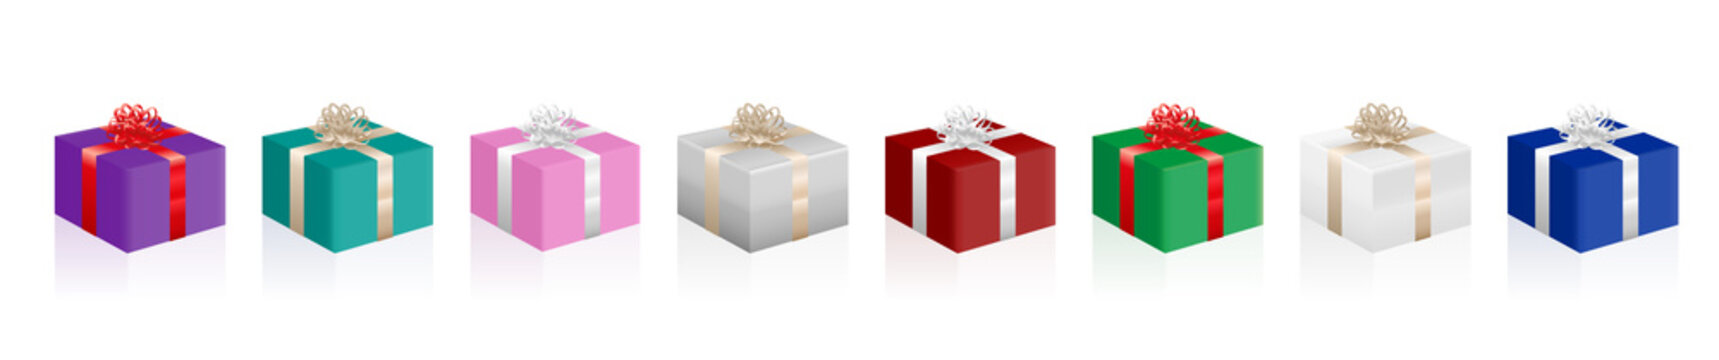 Christmas parcels, colorful set of gift packages, presents. Isolated vector illustration on white background.
